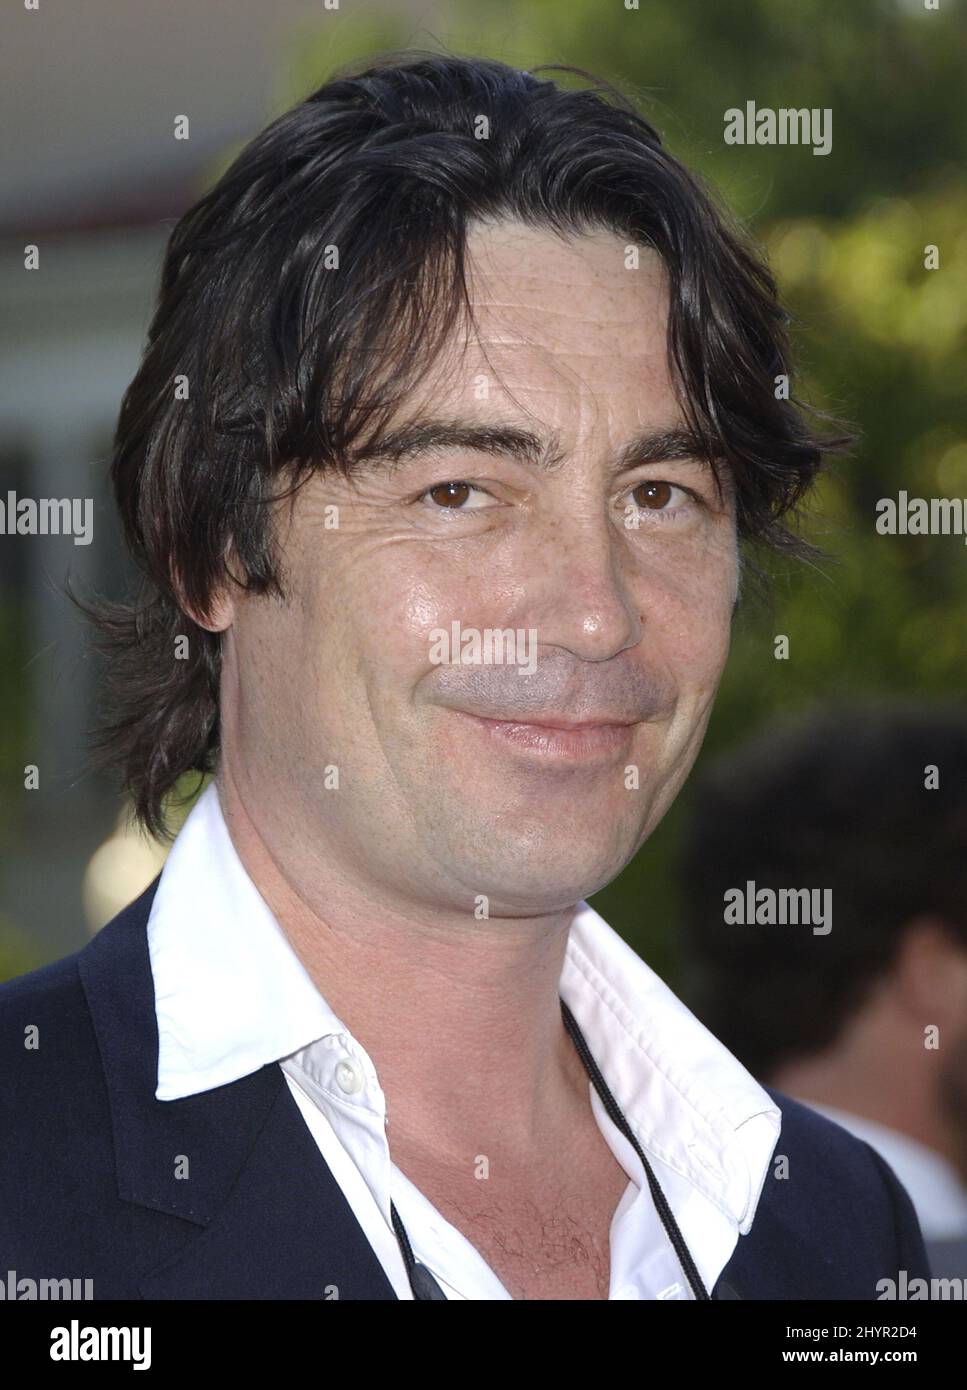 Nathaniel Parker attends 'Stardust' LA Premiere held at Paramount